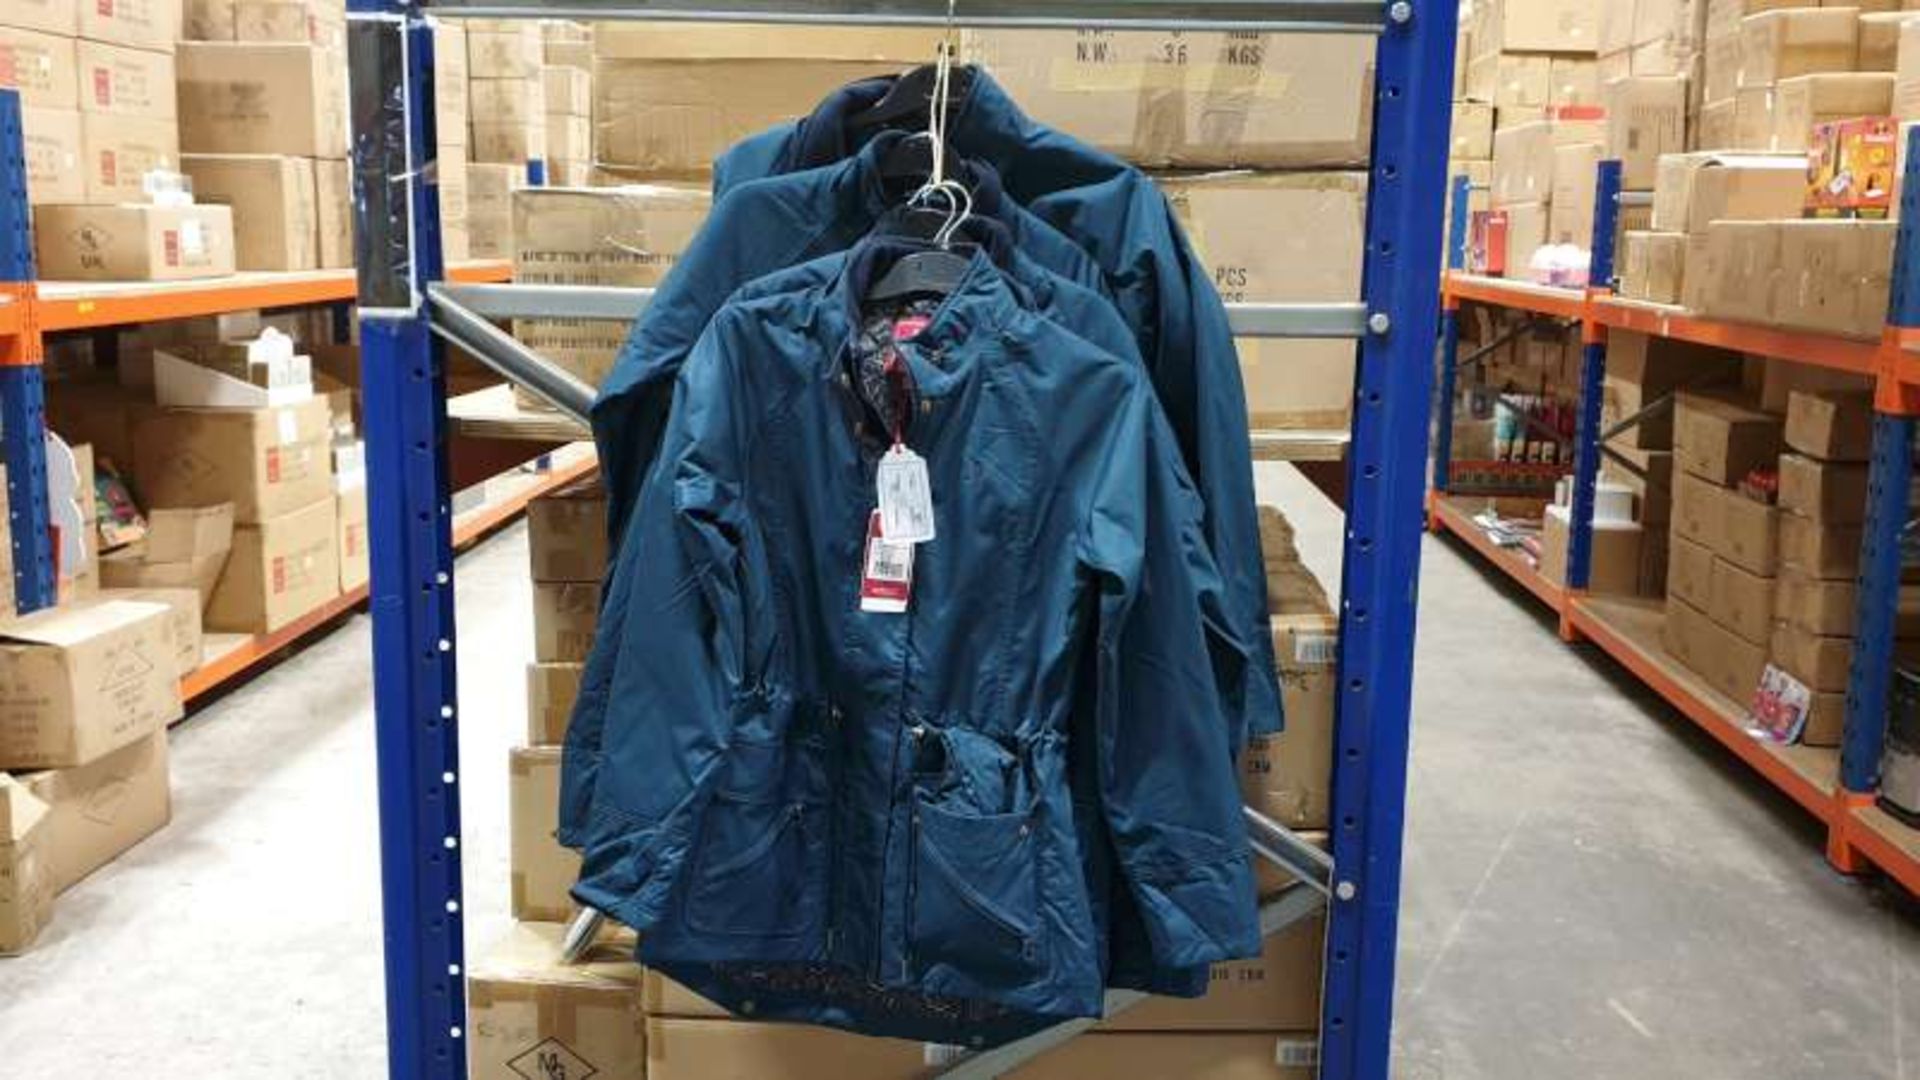 5 X JACK MURPHY LADIES TEAL COLOURED DANIELLE JACKETS SIZES 8 AND 10